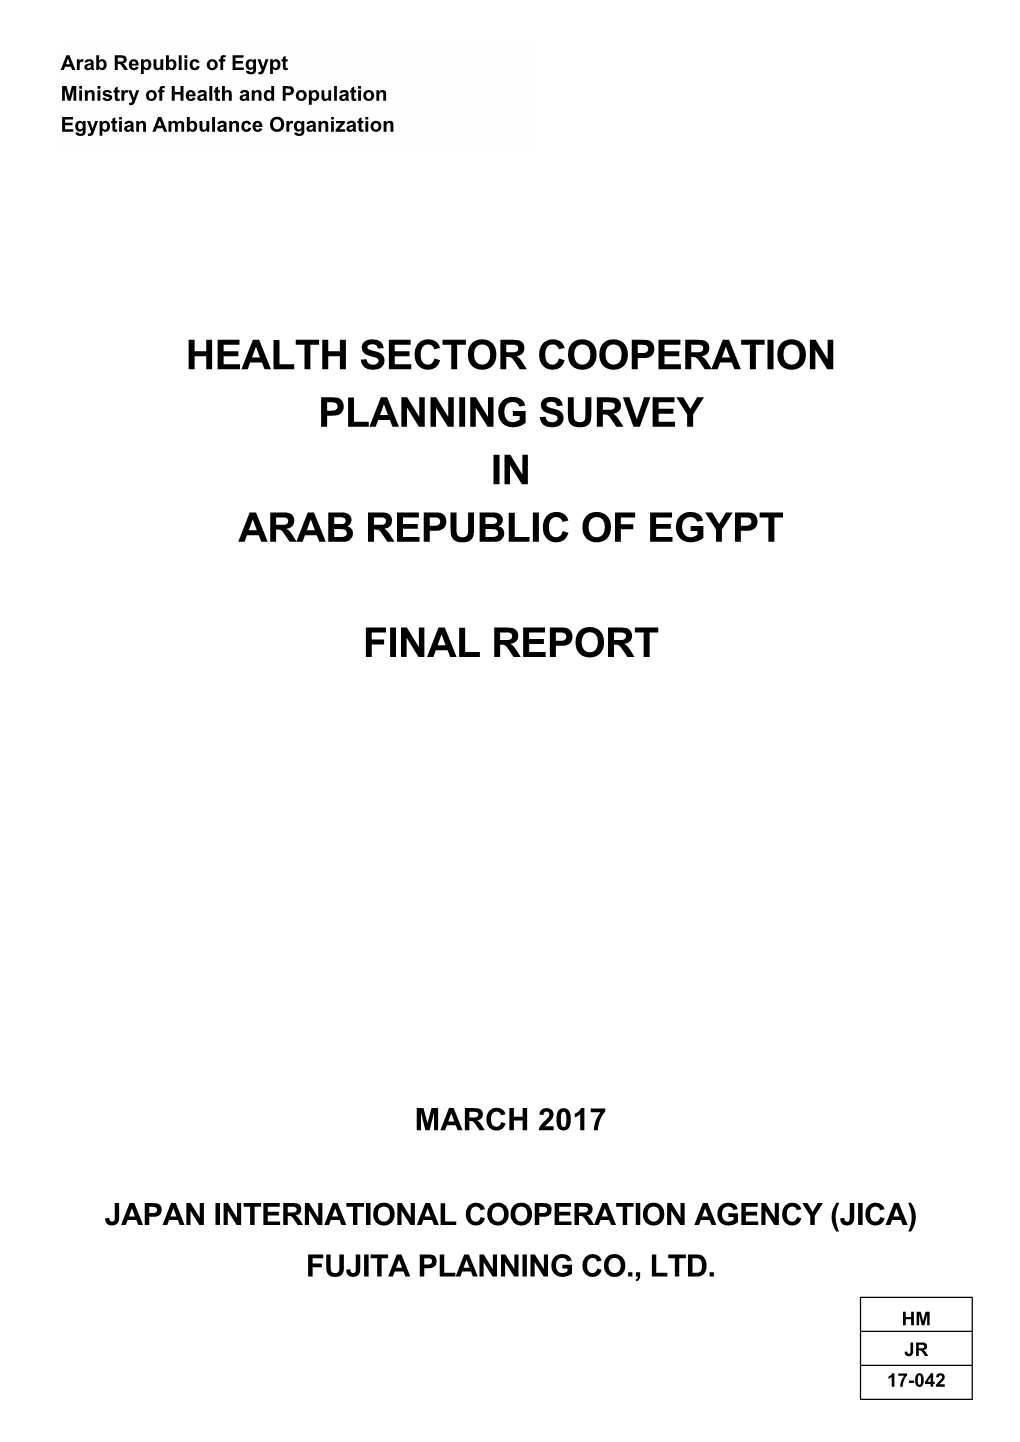 Health Sector Cooperation Planning Survey in Arab Republic of Egypt